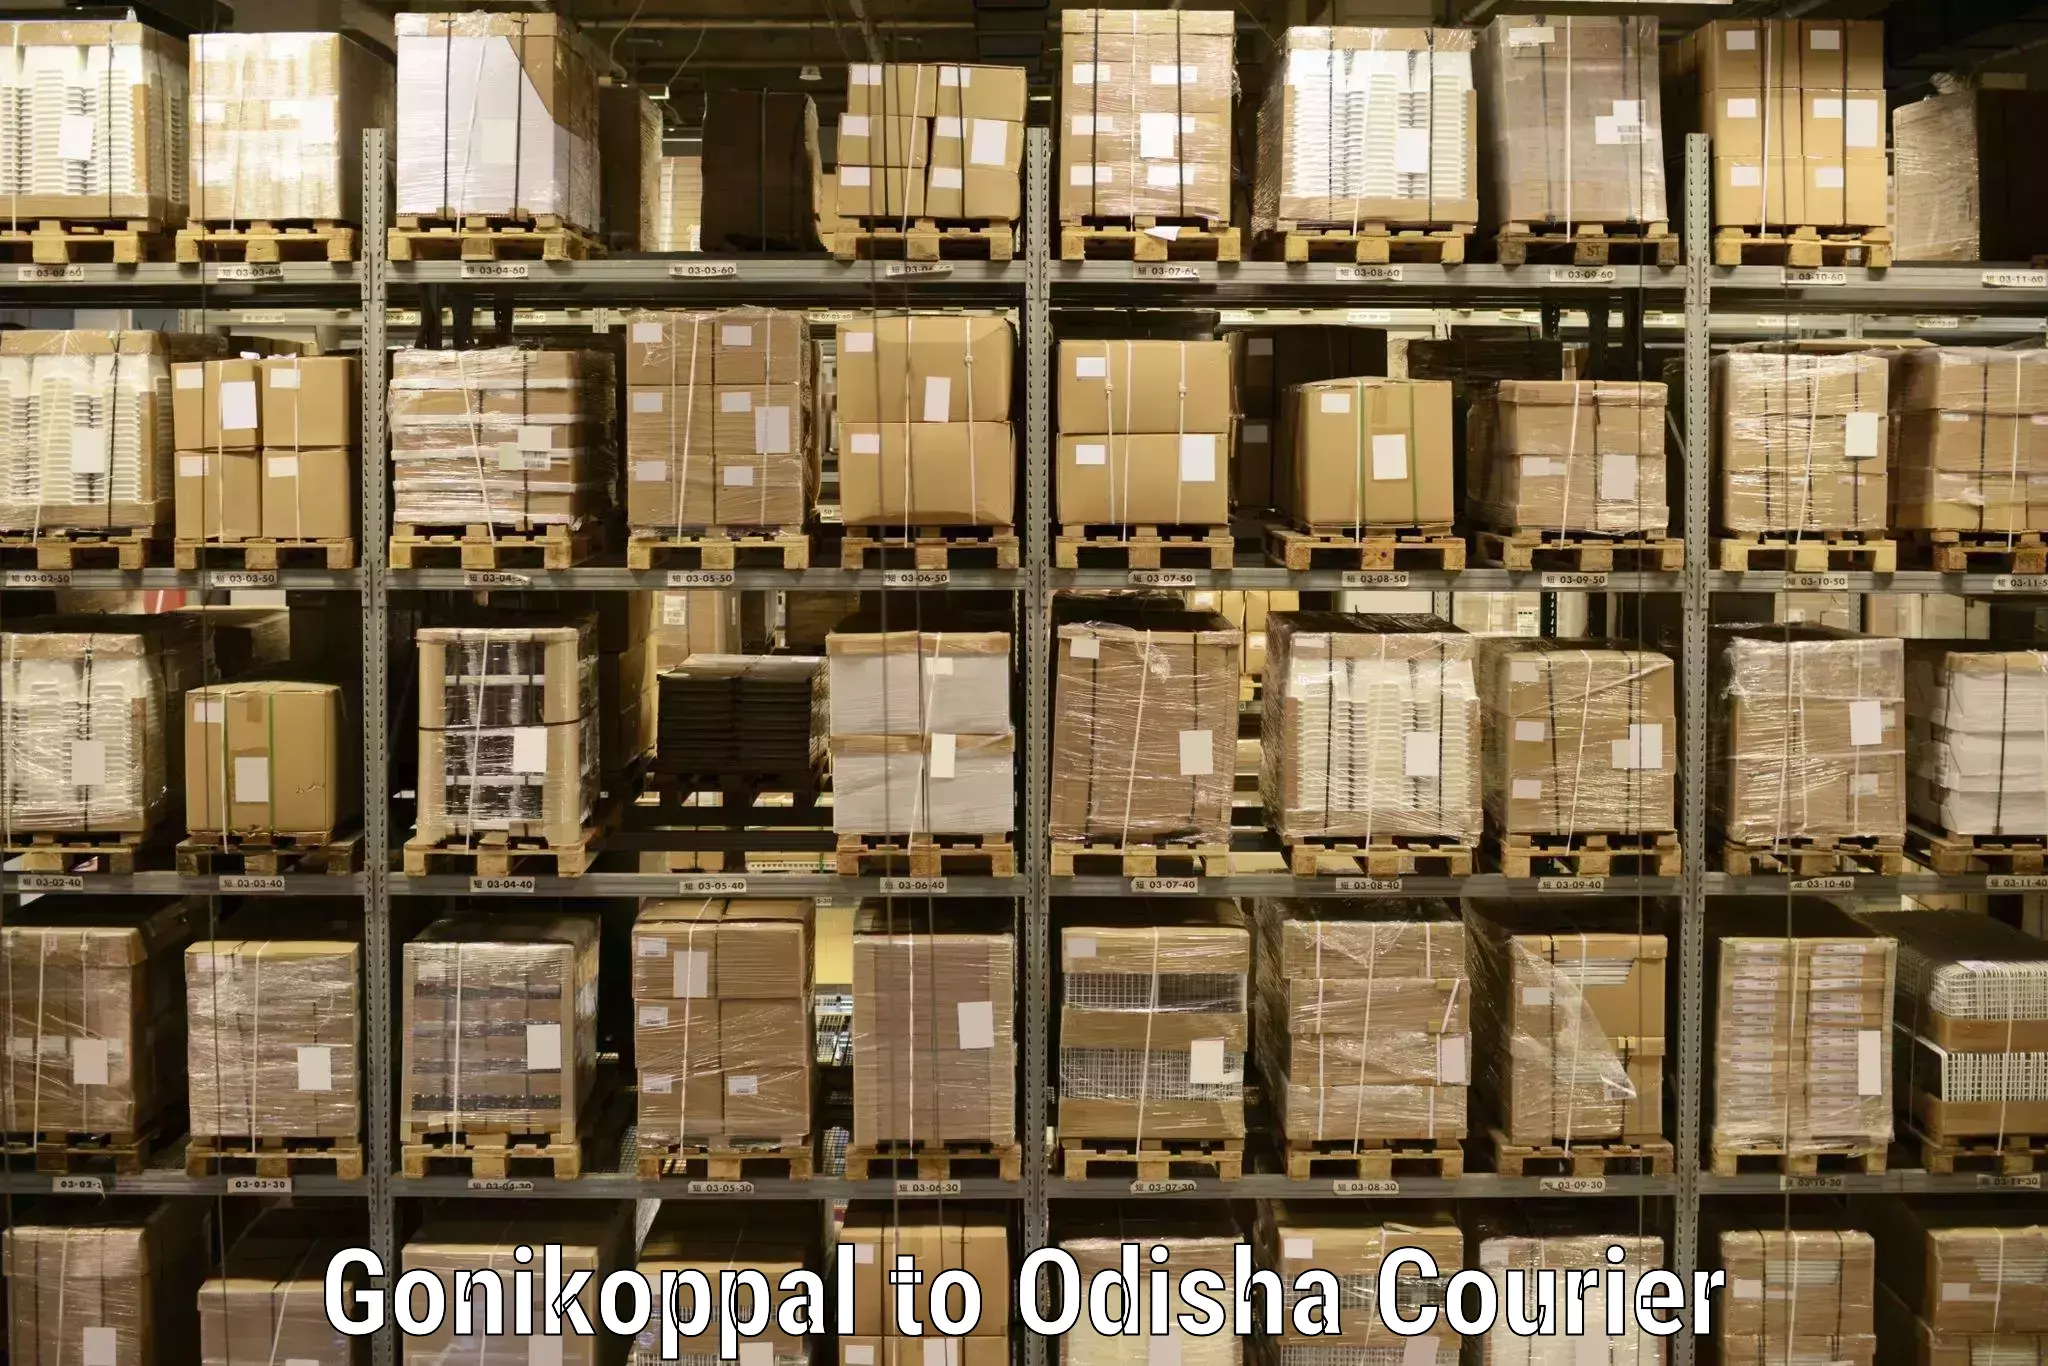 Efficient parcel service Gonikoppal to Kalapathar Cuttack